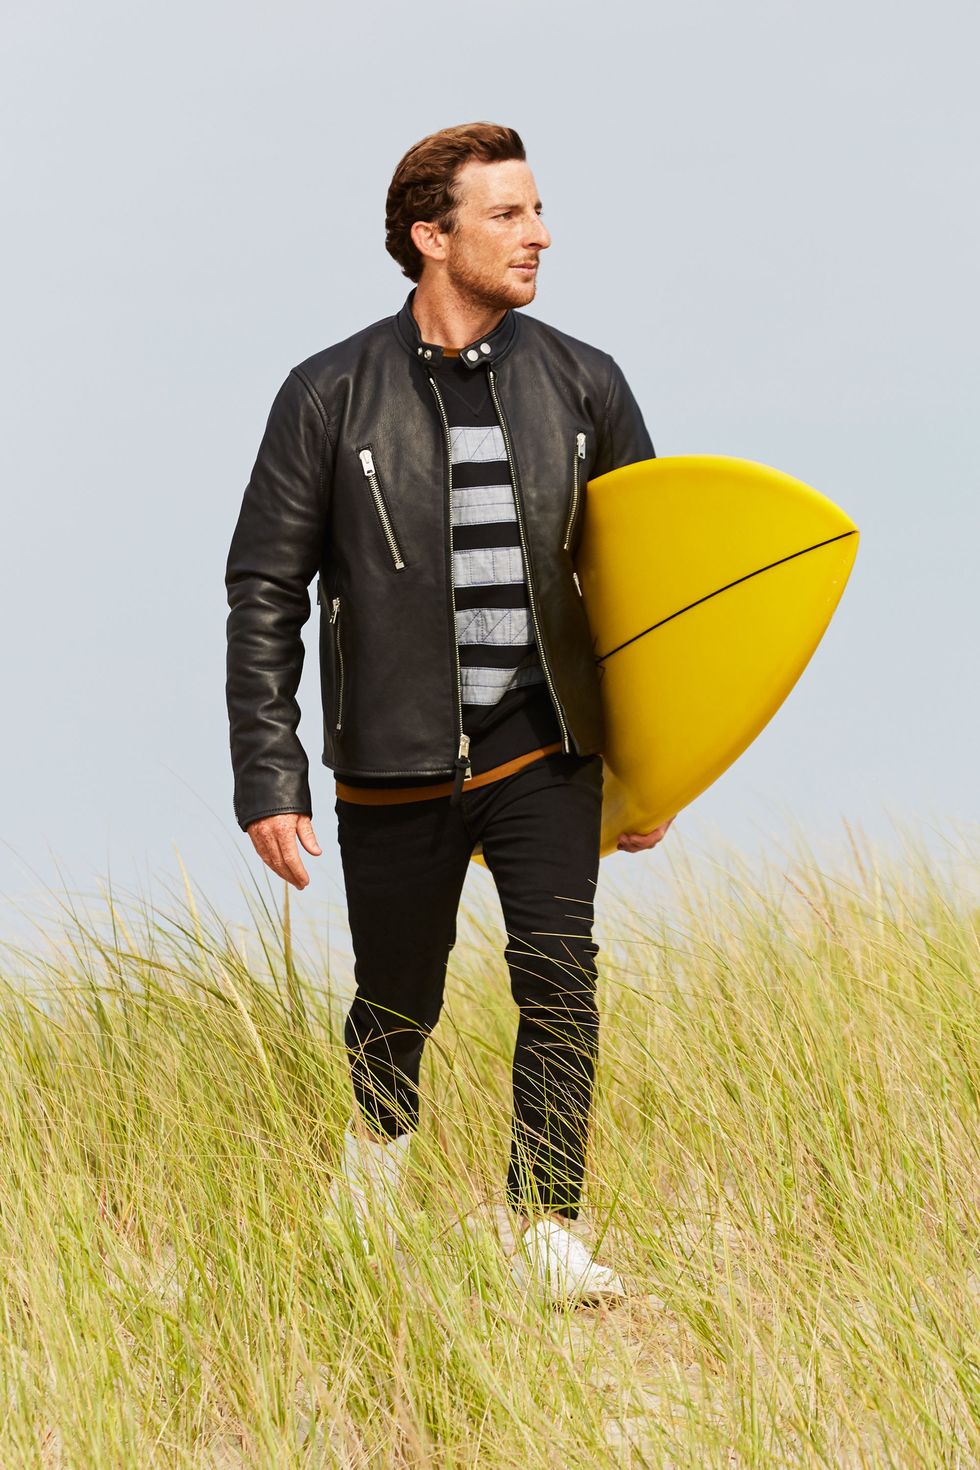 Jacket, Sleeve, Outerwear, Standing, People in nature, Surfboard, Surfing Equipment, Grassland, Leather jacket, Leather, 